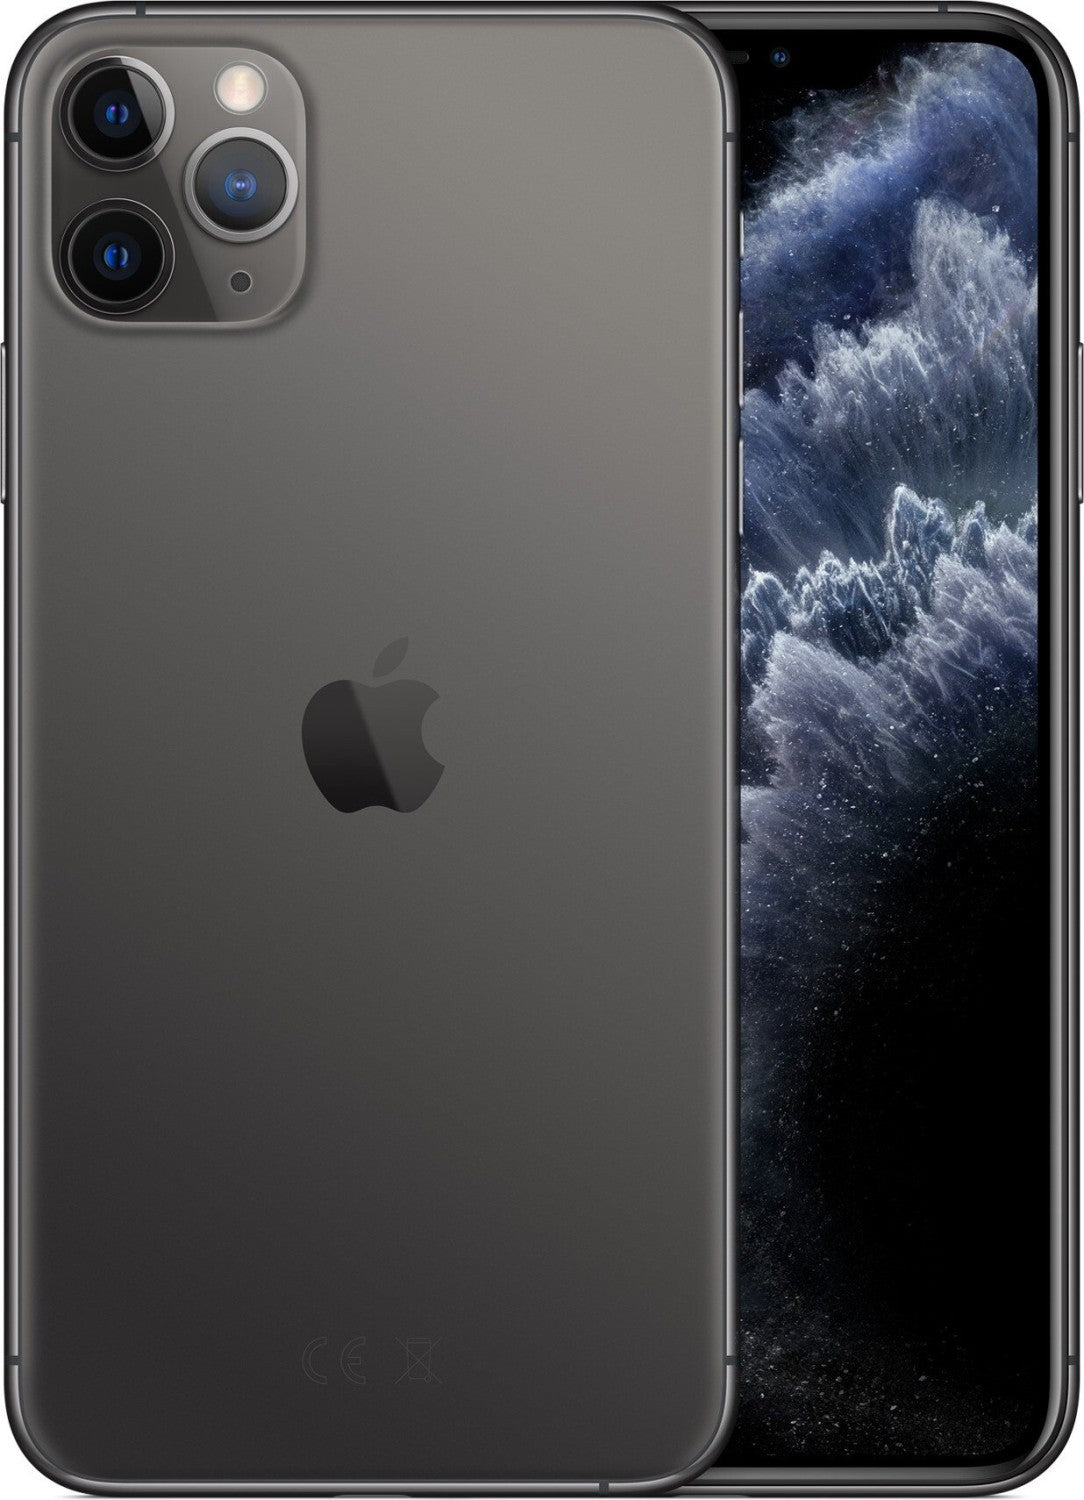 Apple iPhone 11 Pro Max | 64GB | Space Gray | GUT